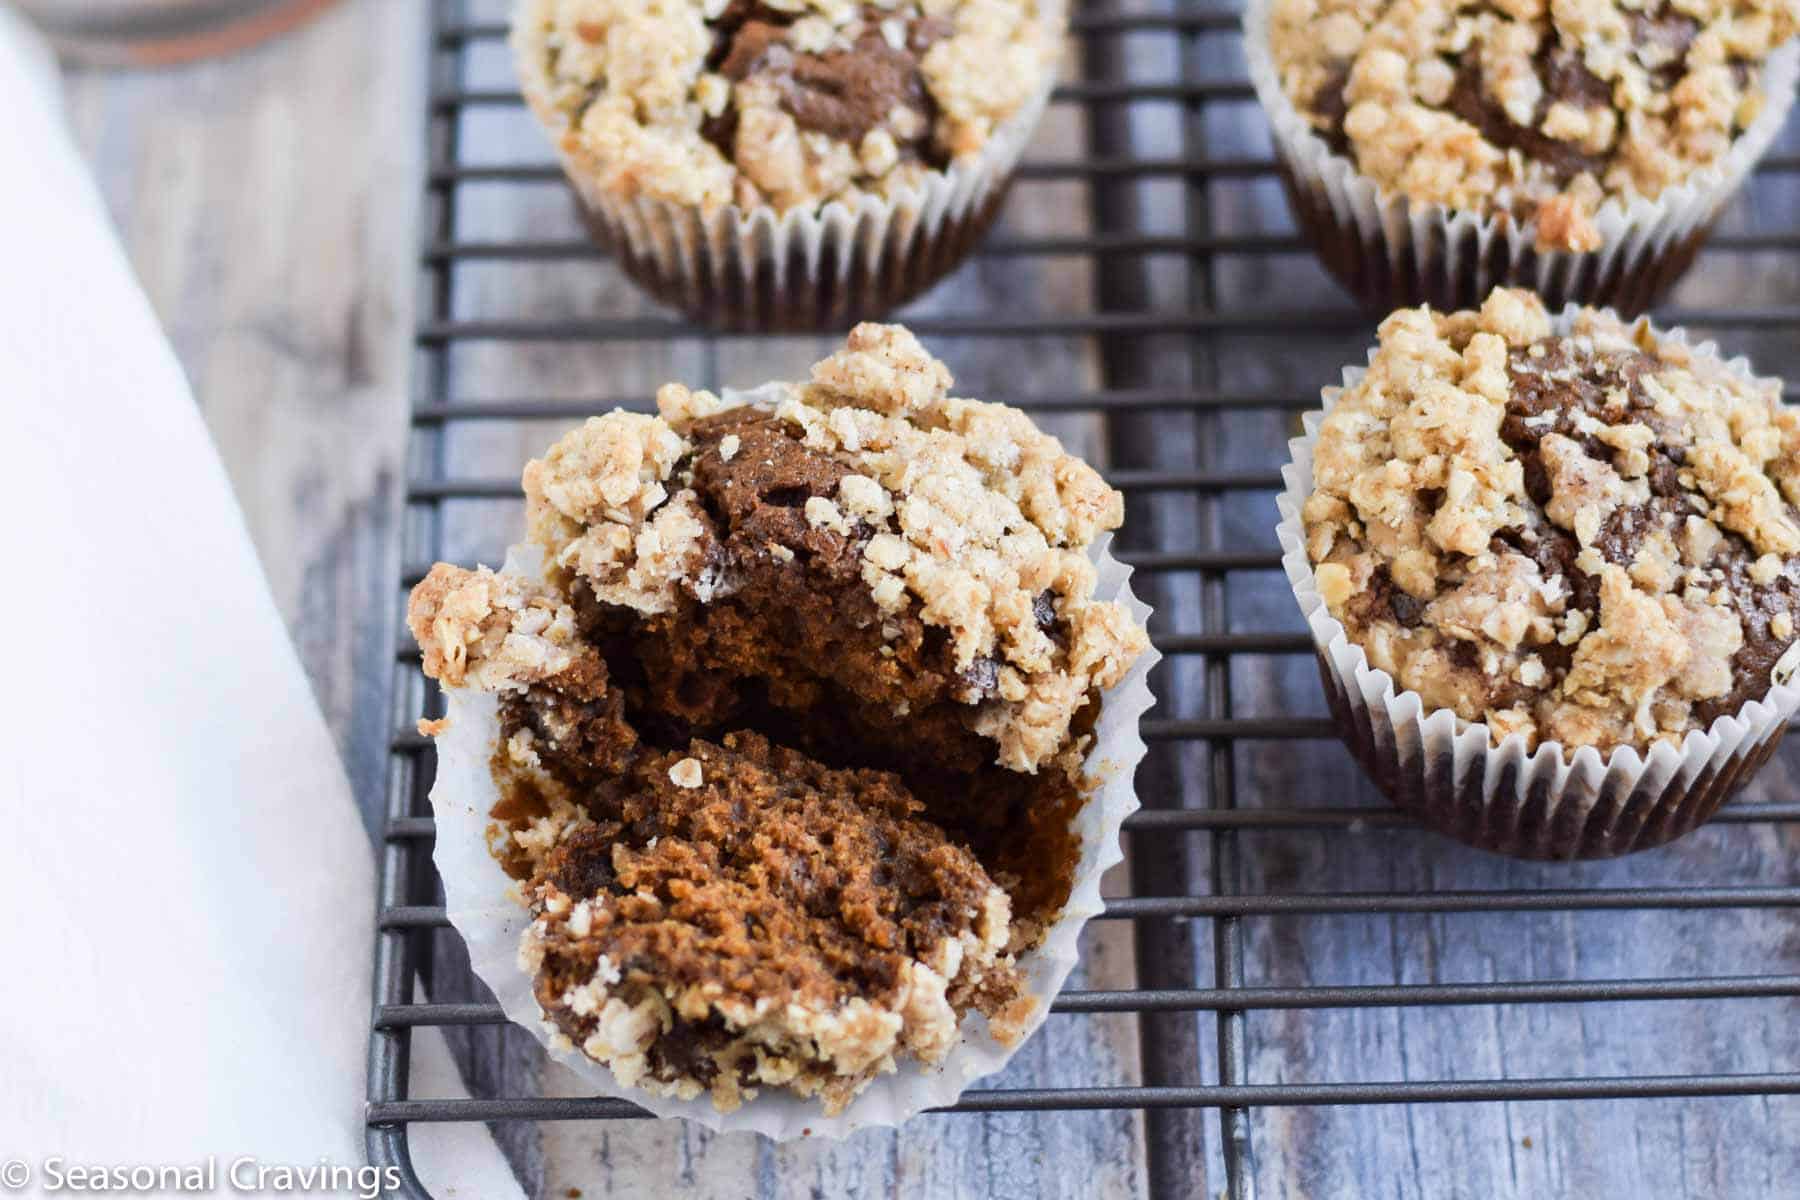 Gingerbread Spice Muffins - moist, sweet and delicious with a decadent crumb topping